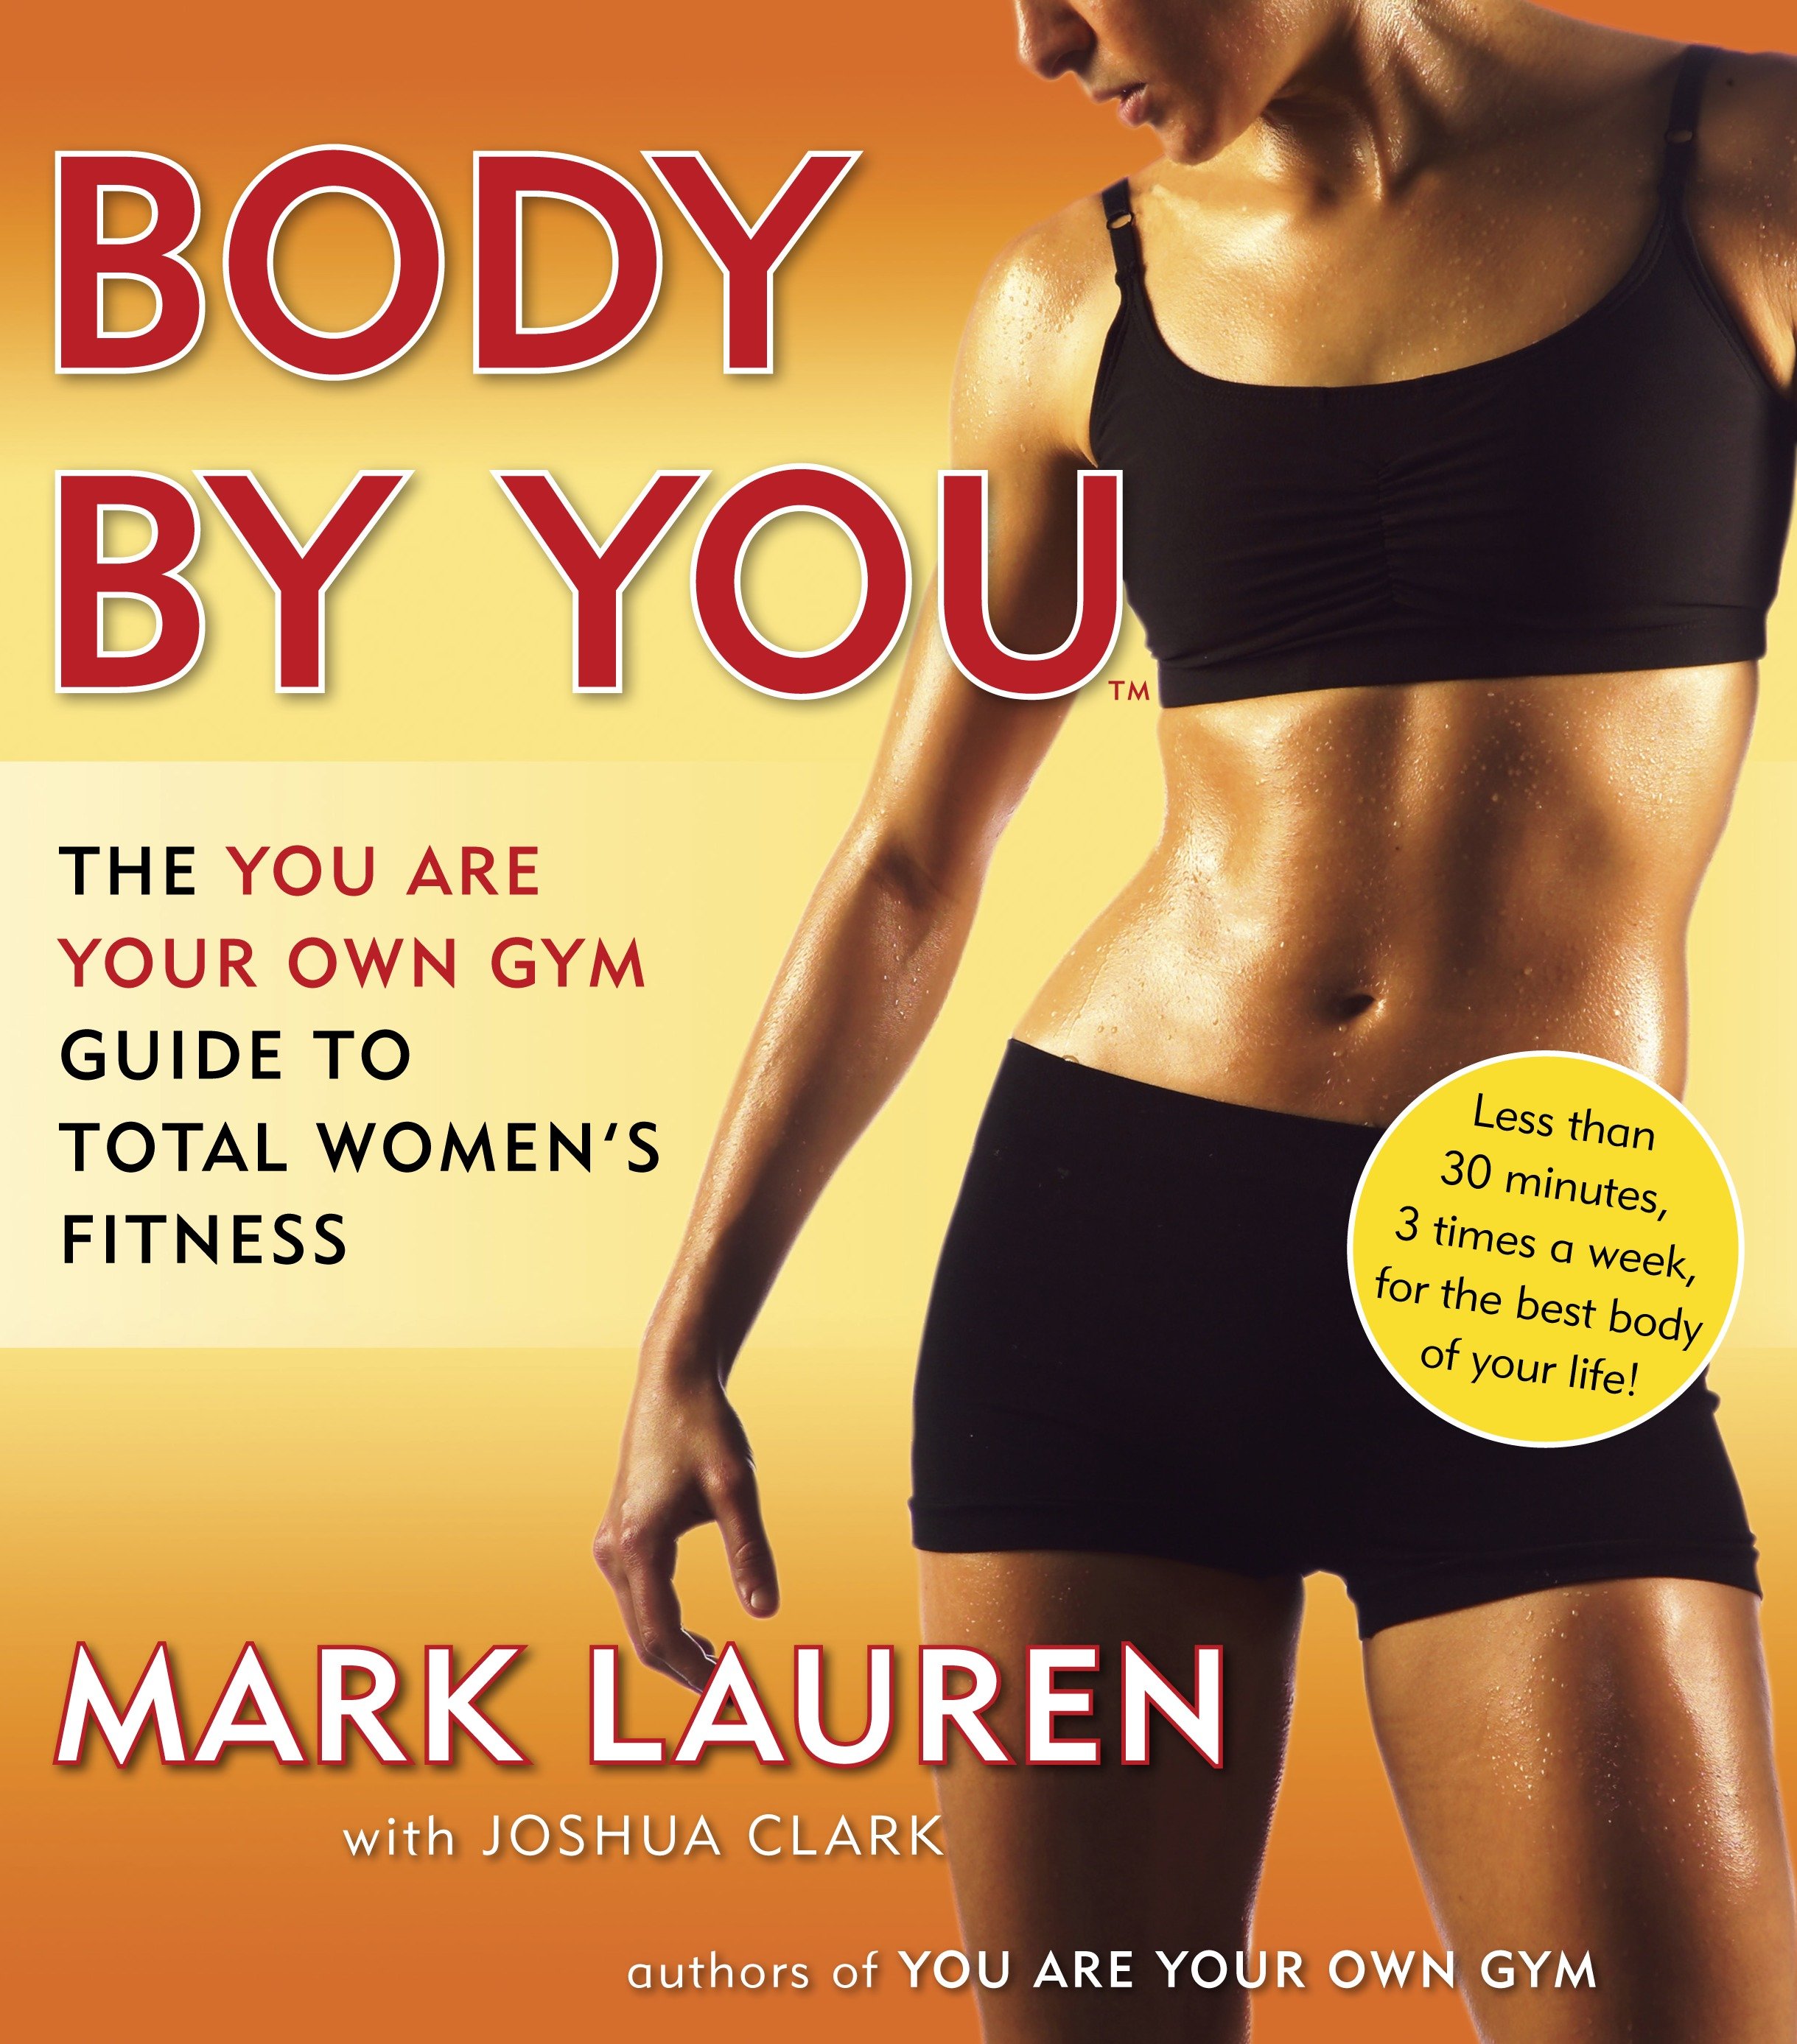 Body by you the you are your own gym guide to total women's fitness cover image